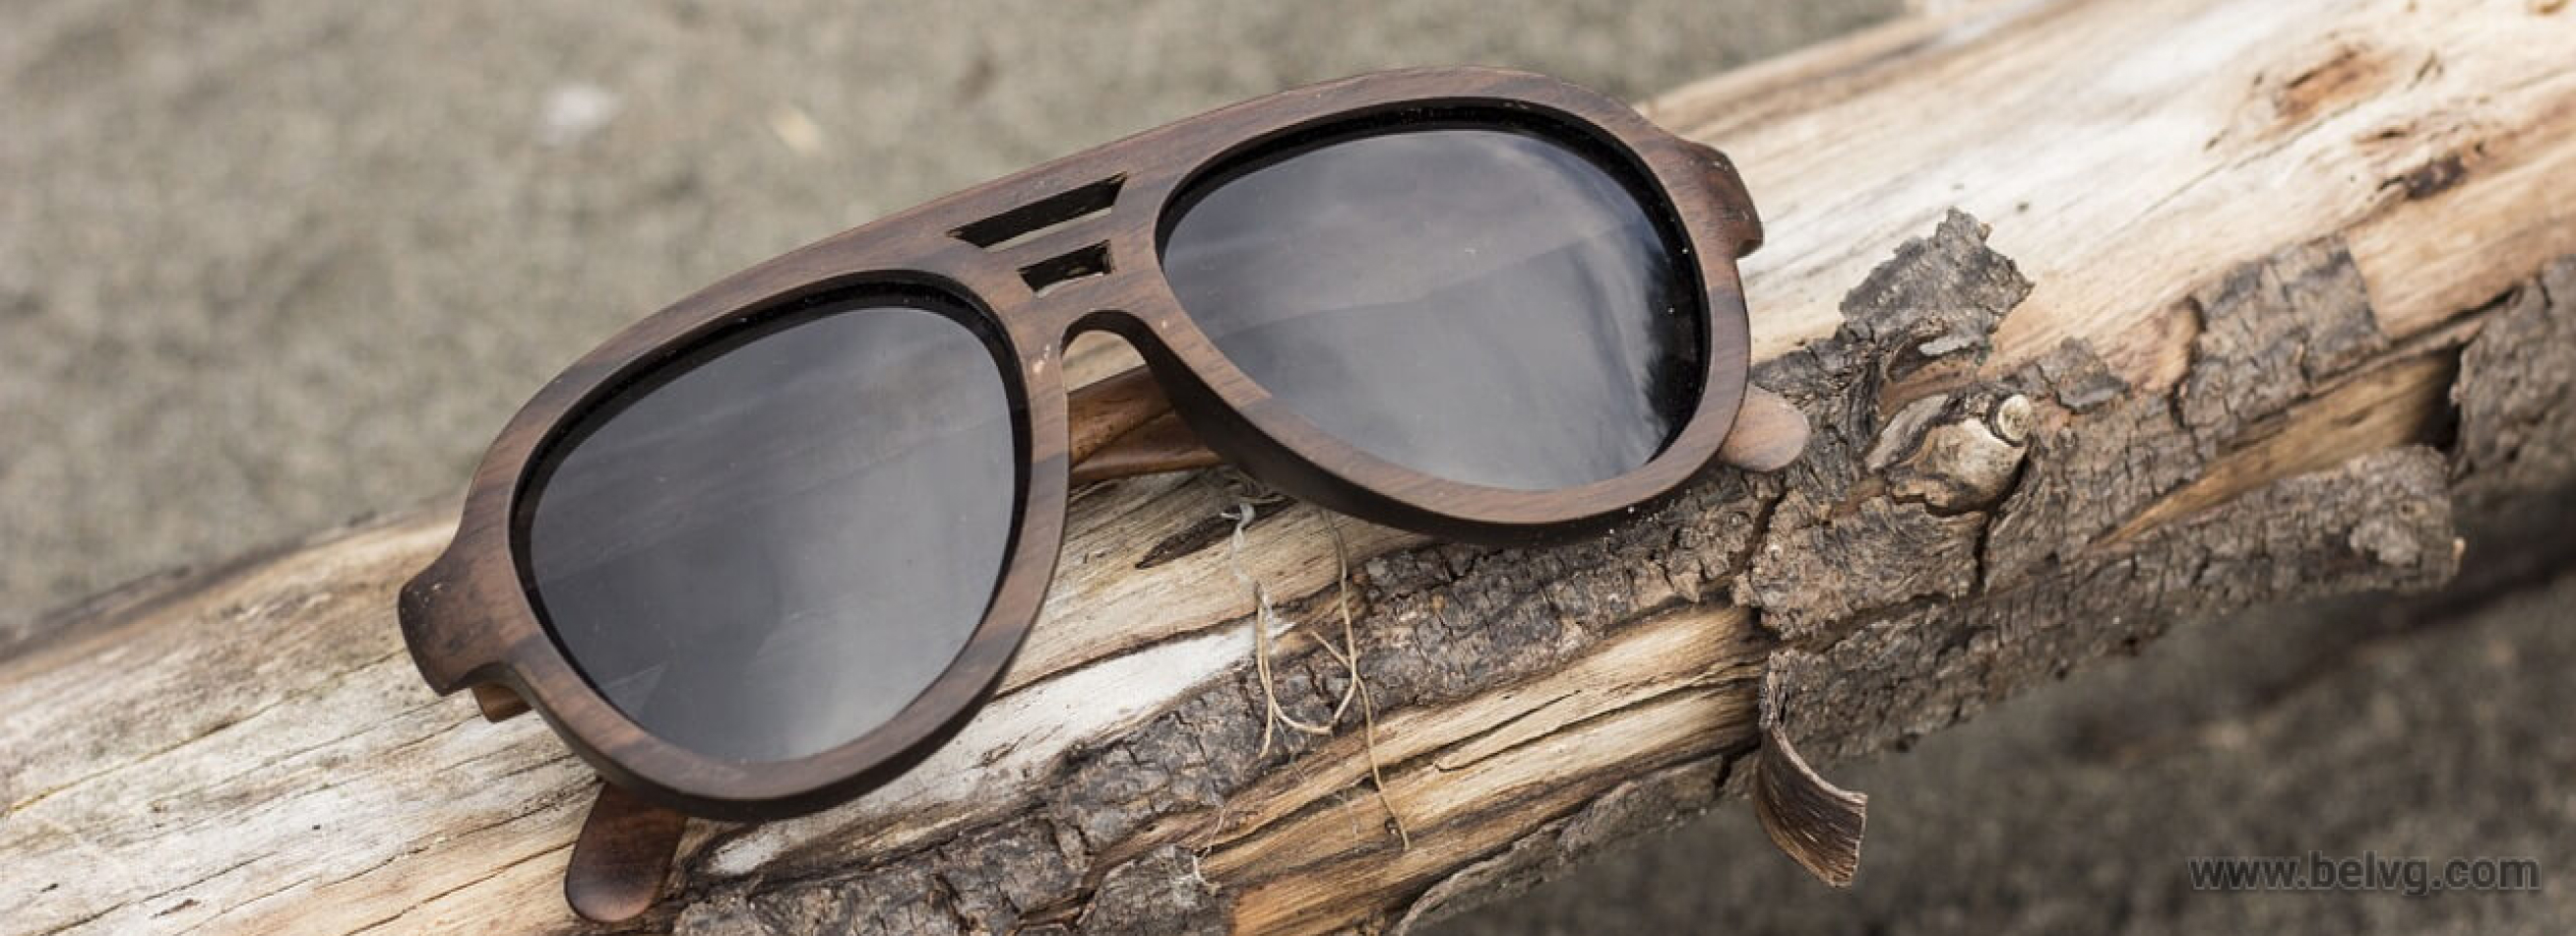 wooden sunglasses - eco product